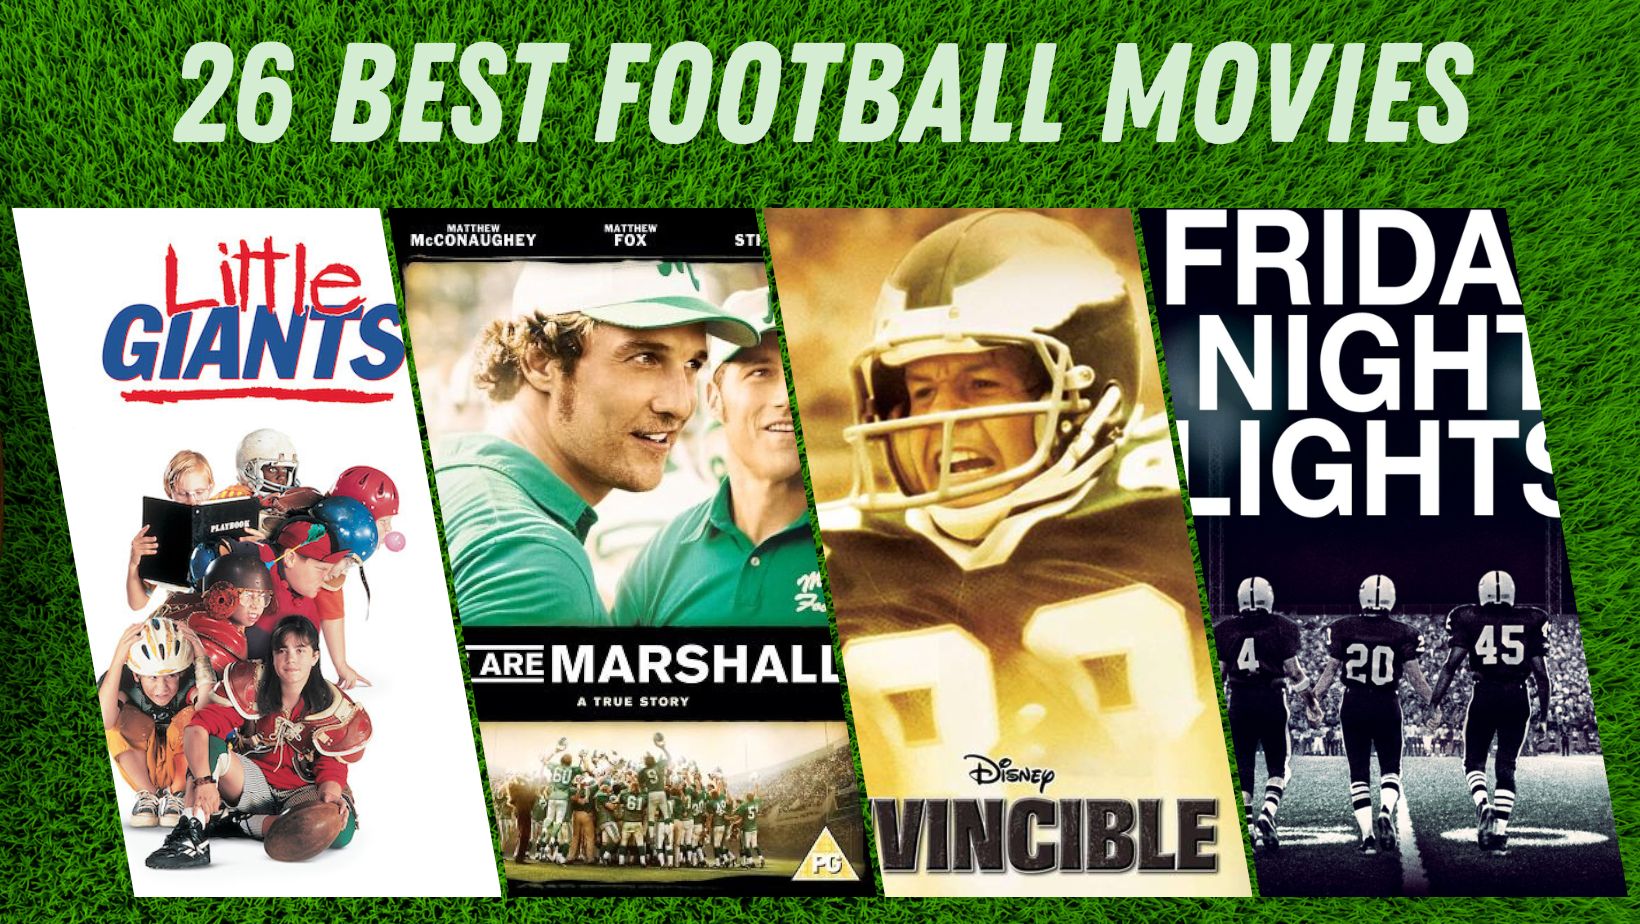 26 Top Football Movies for Sports Fans